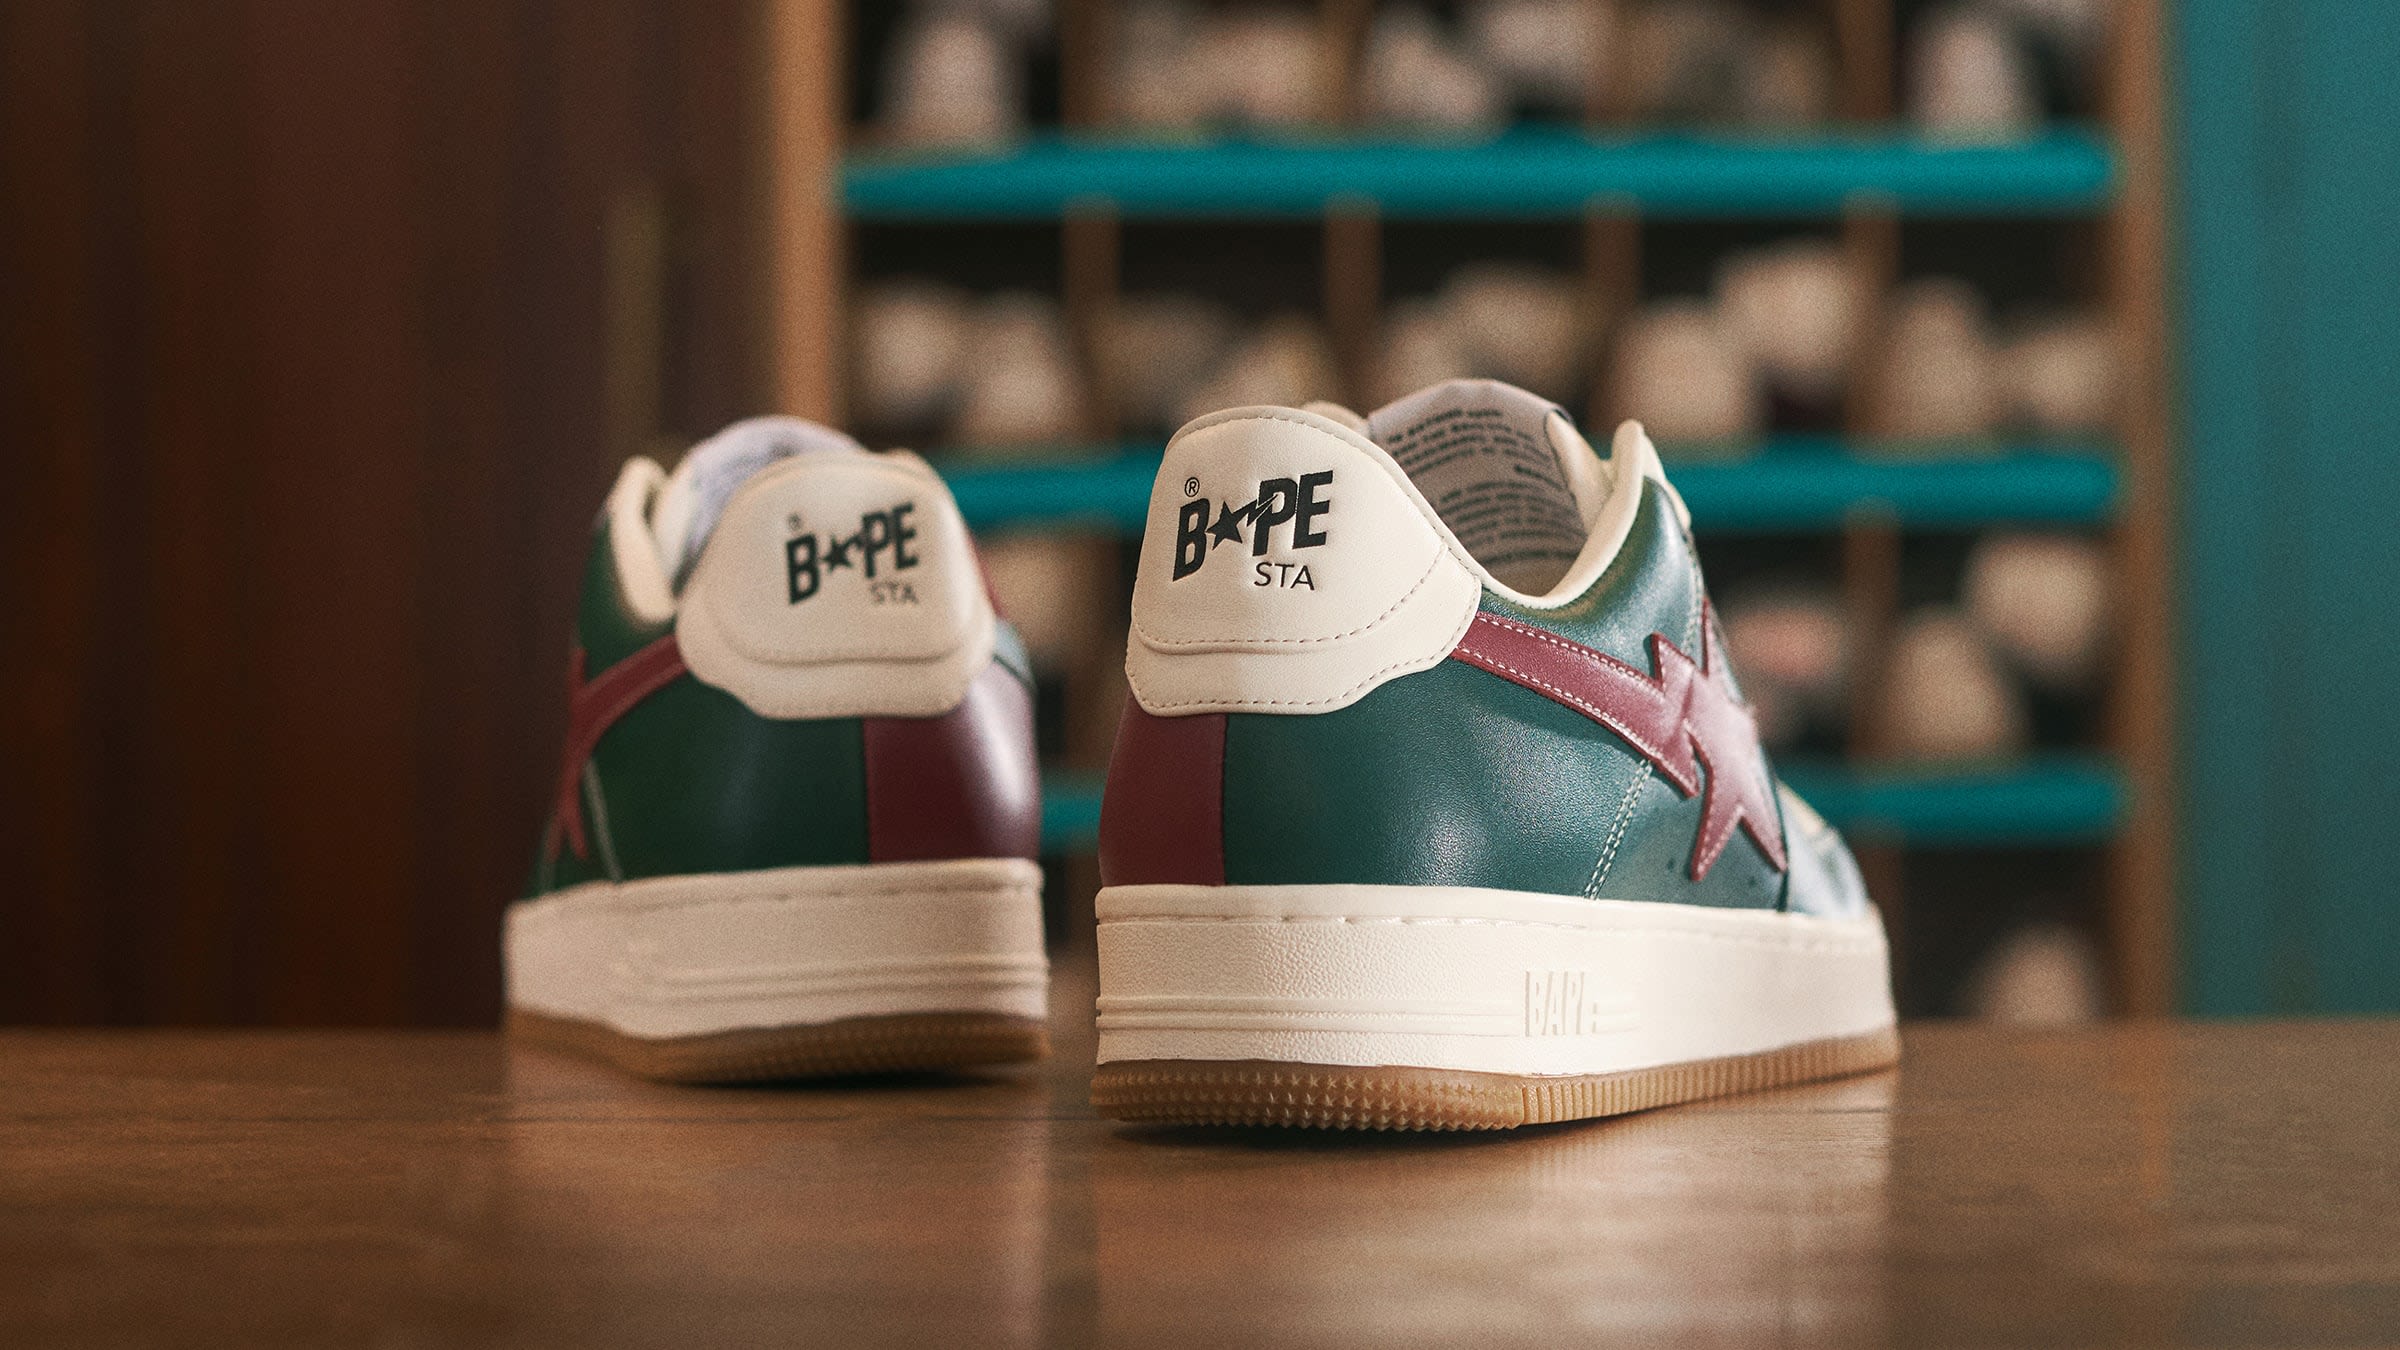 Bape Agrees to Discontinue Some Sneaker Models Following Nike Trademark Lawsuit Settlement